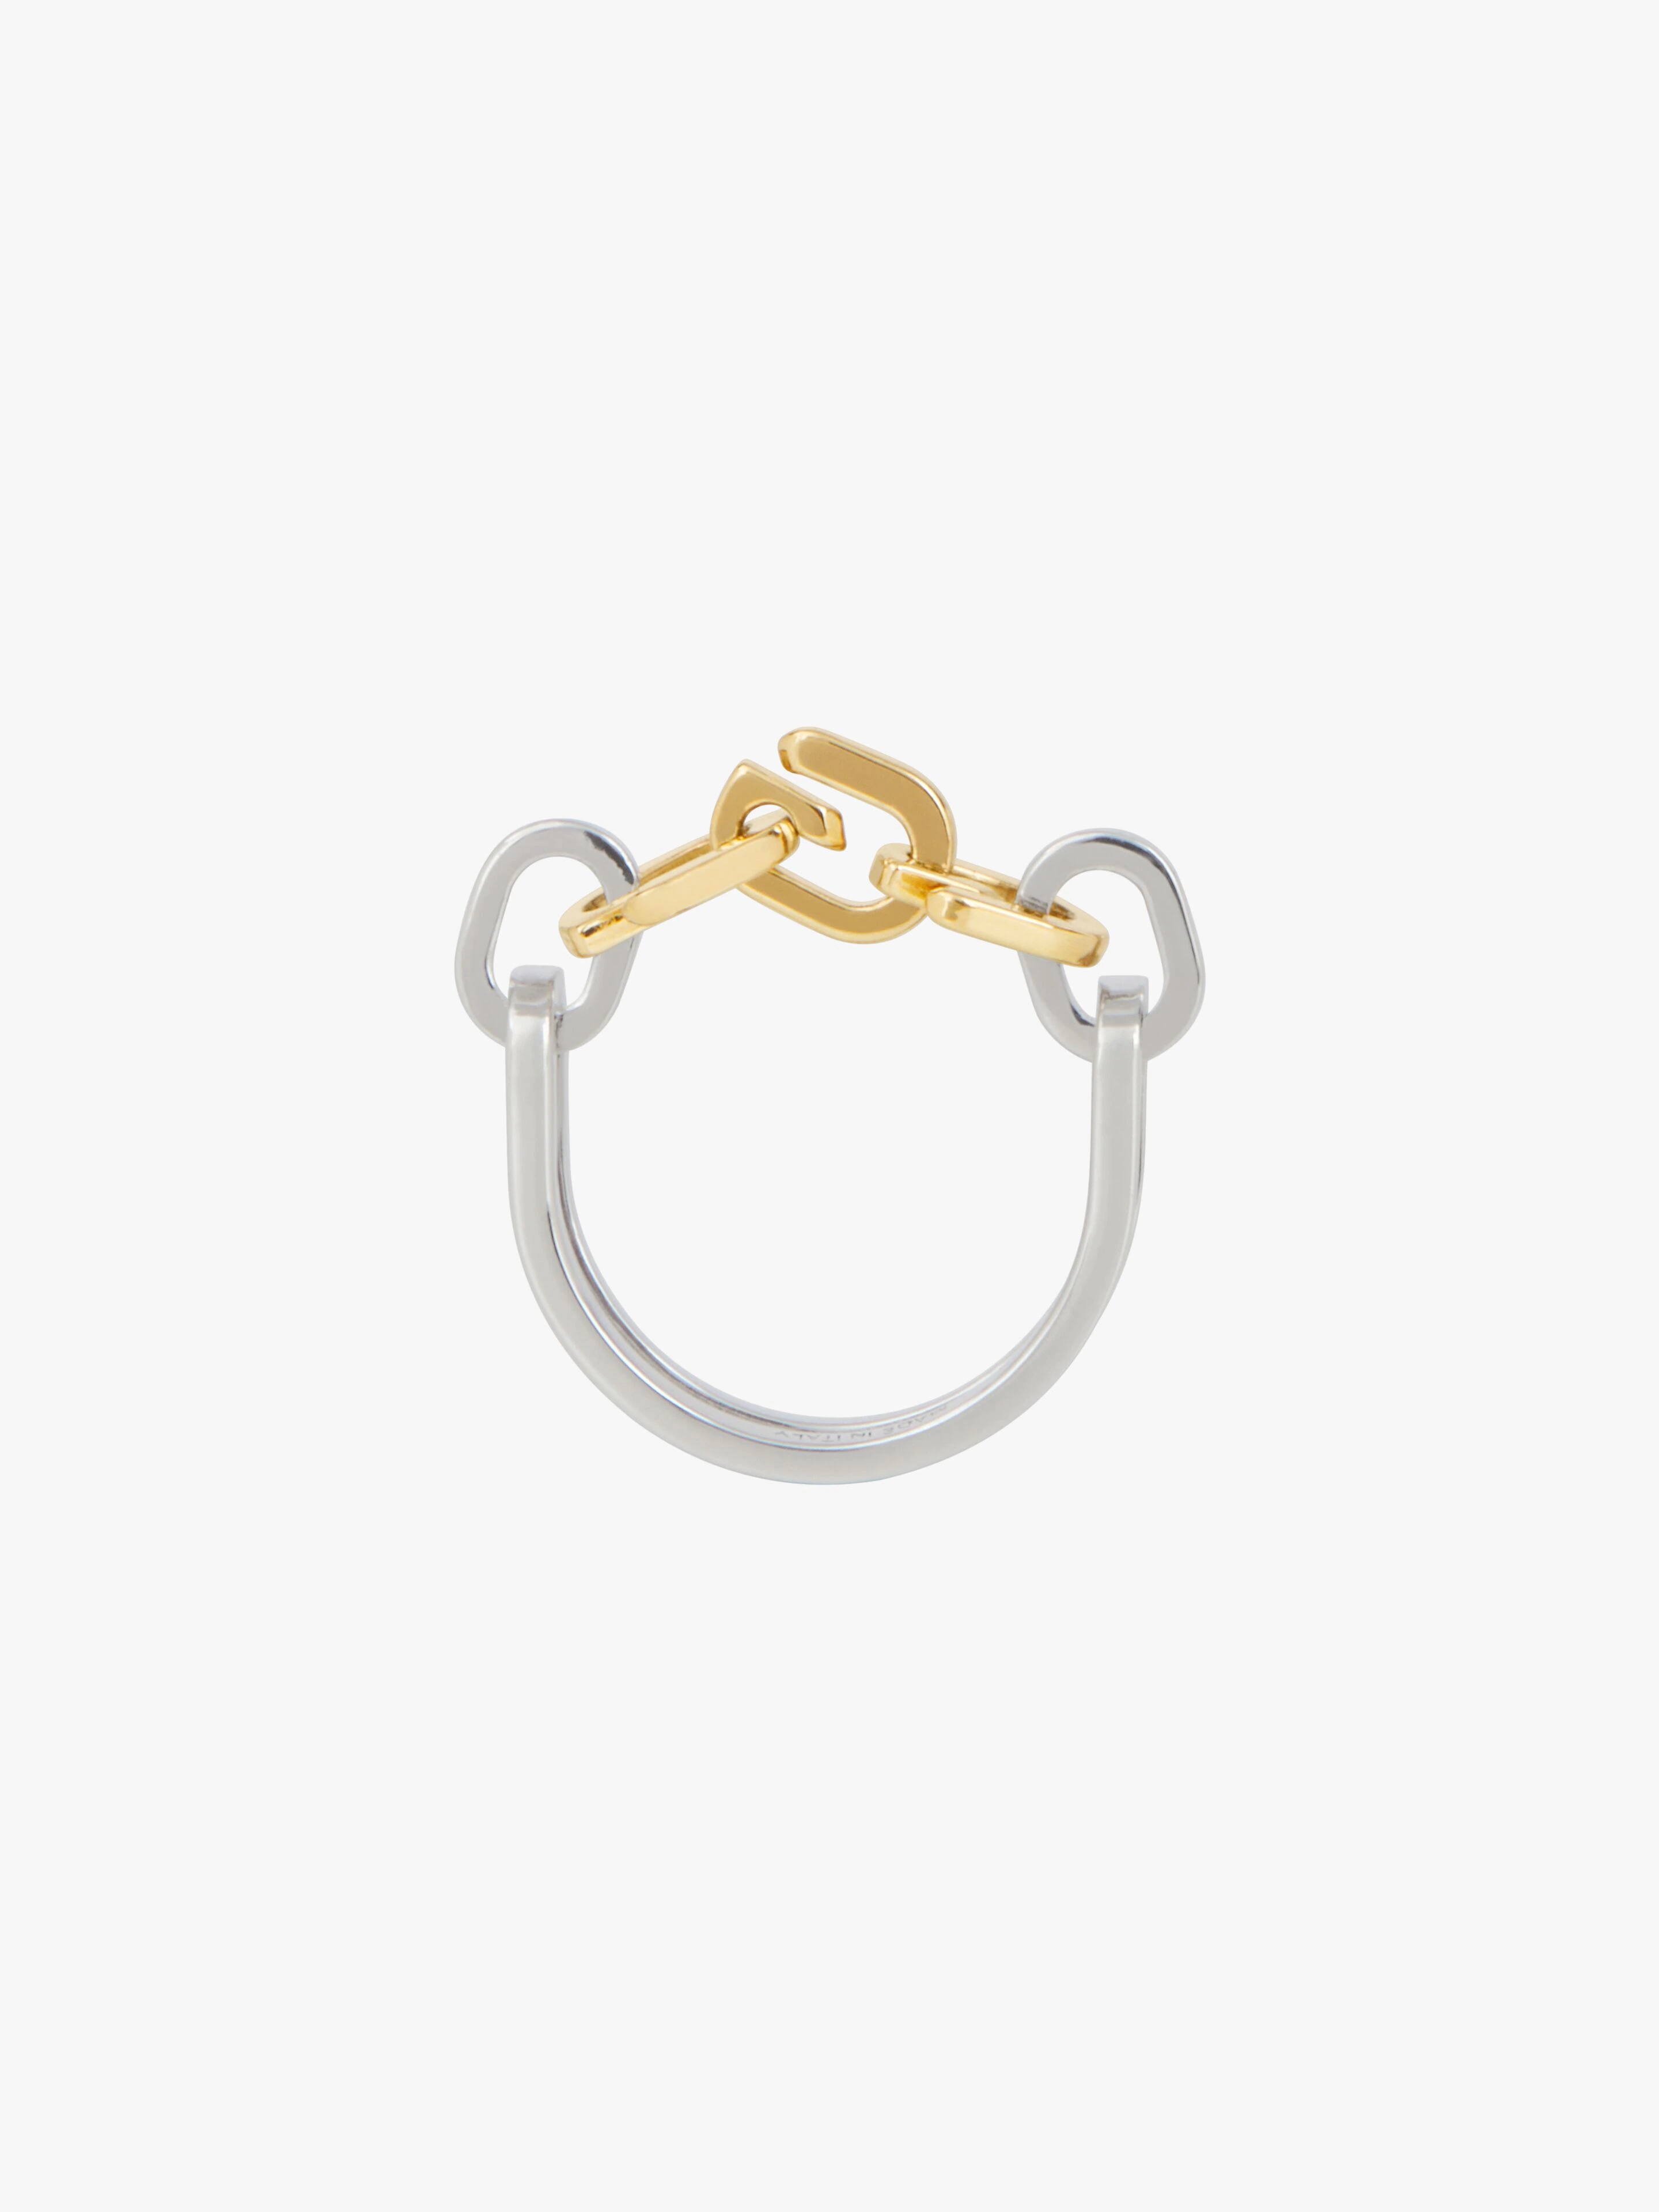 G LINK TWO TONE RING - 2